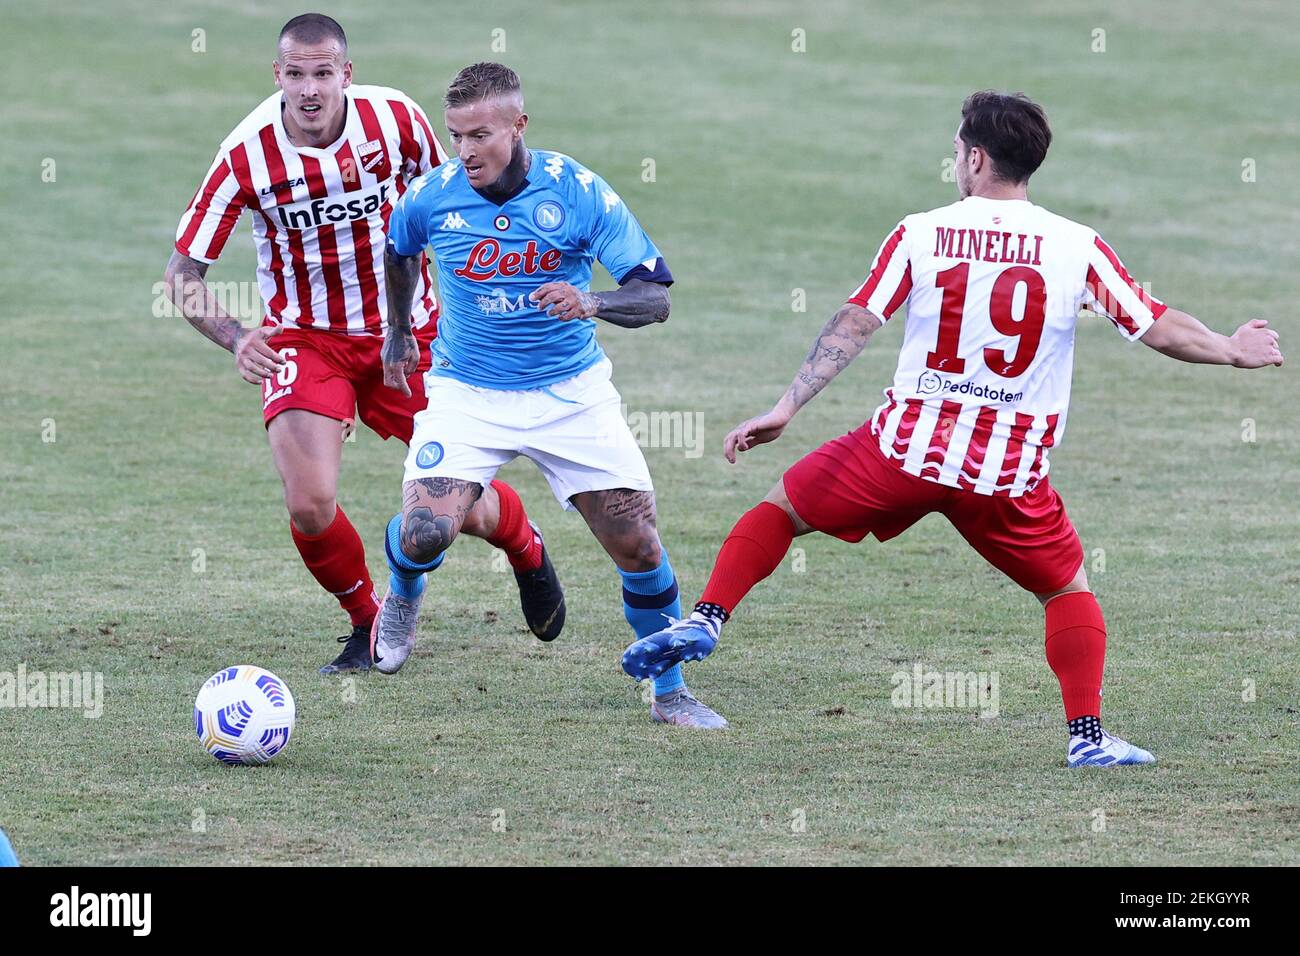 Amato Ciceretti of Napoli SSC compete for the ball during the friendly  football match between SSC Napoli and SS Teramo Calcio 1913 at stadio  Patini in Castel di Sangro, Italy, September 04,